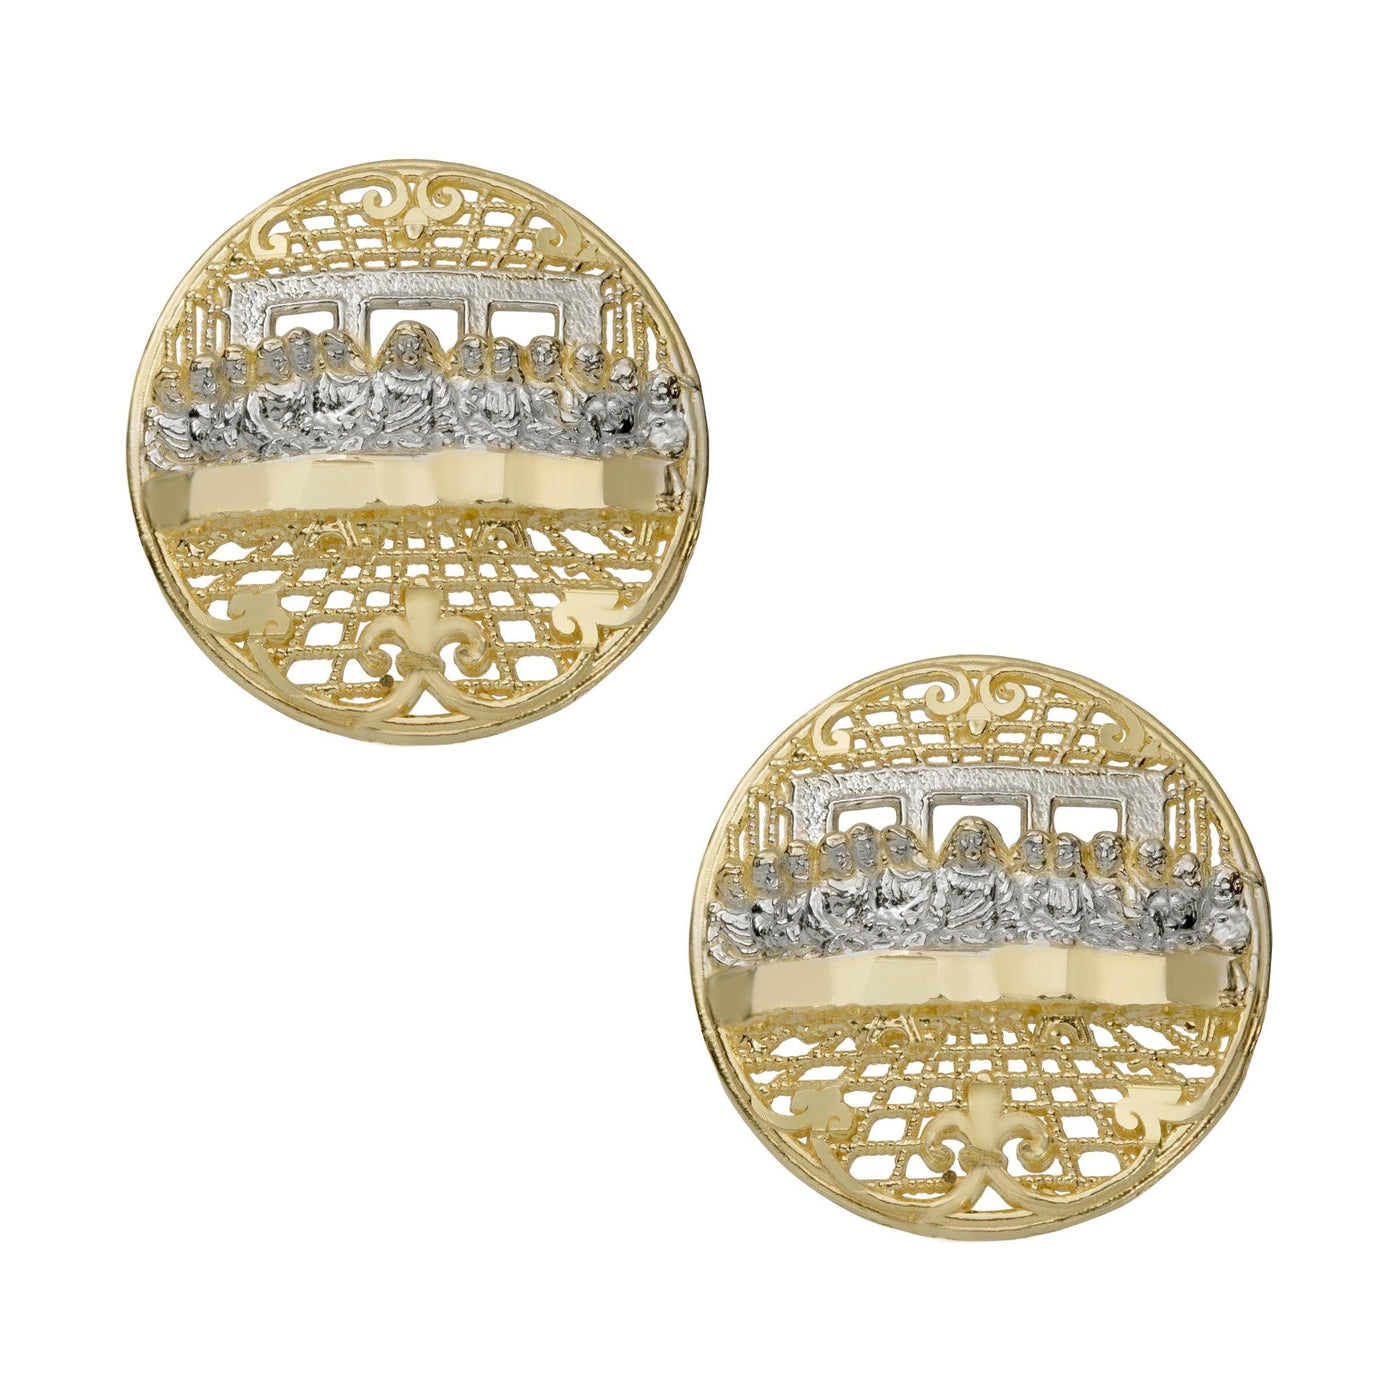 Round Diamond Cut the Last Supper Stud Earrings Solid 10K Yellow Gold - bayamjewelry